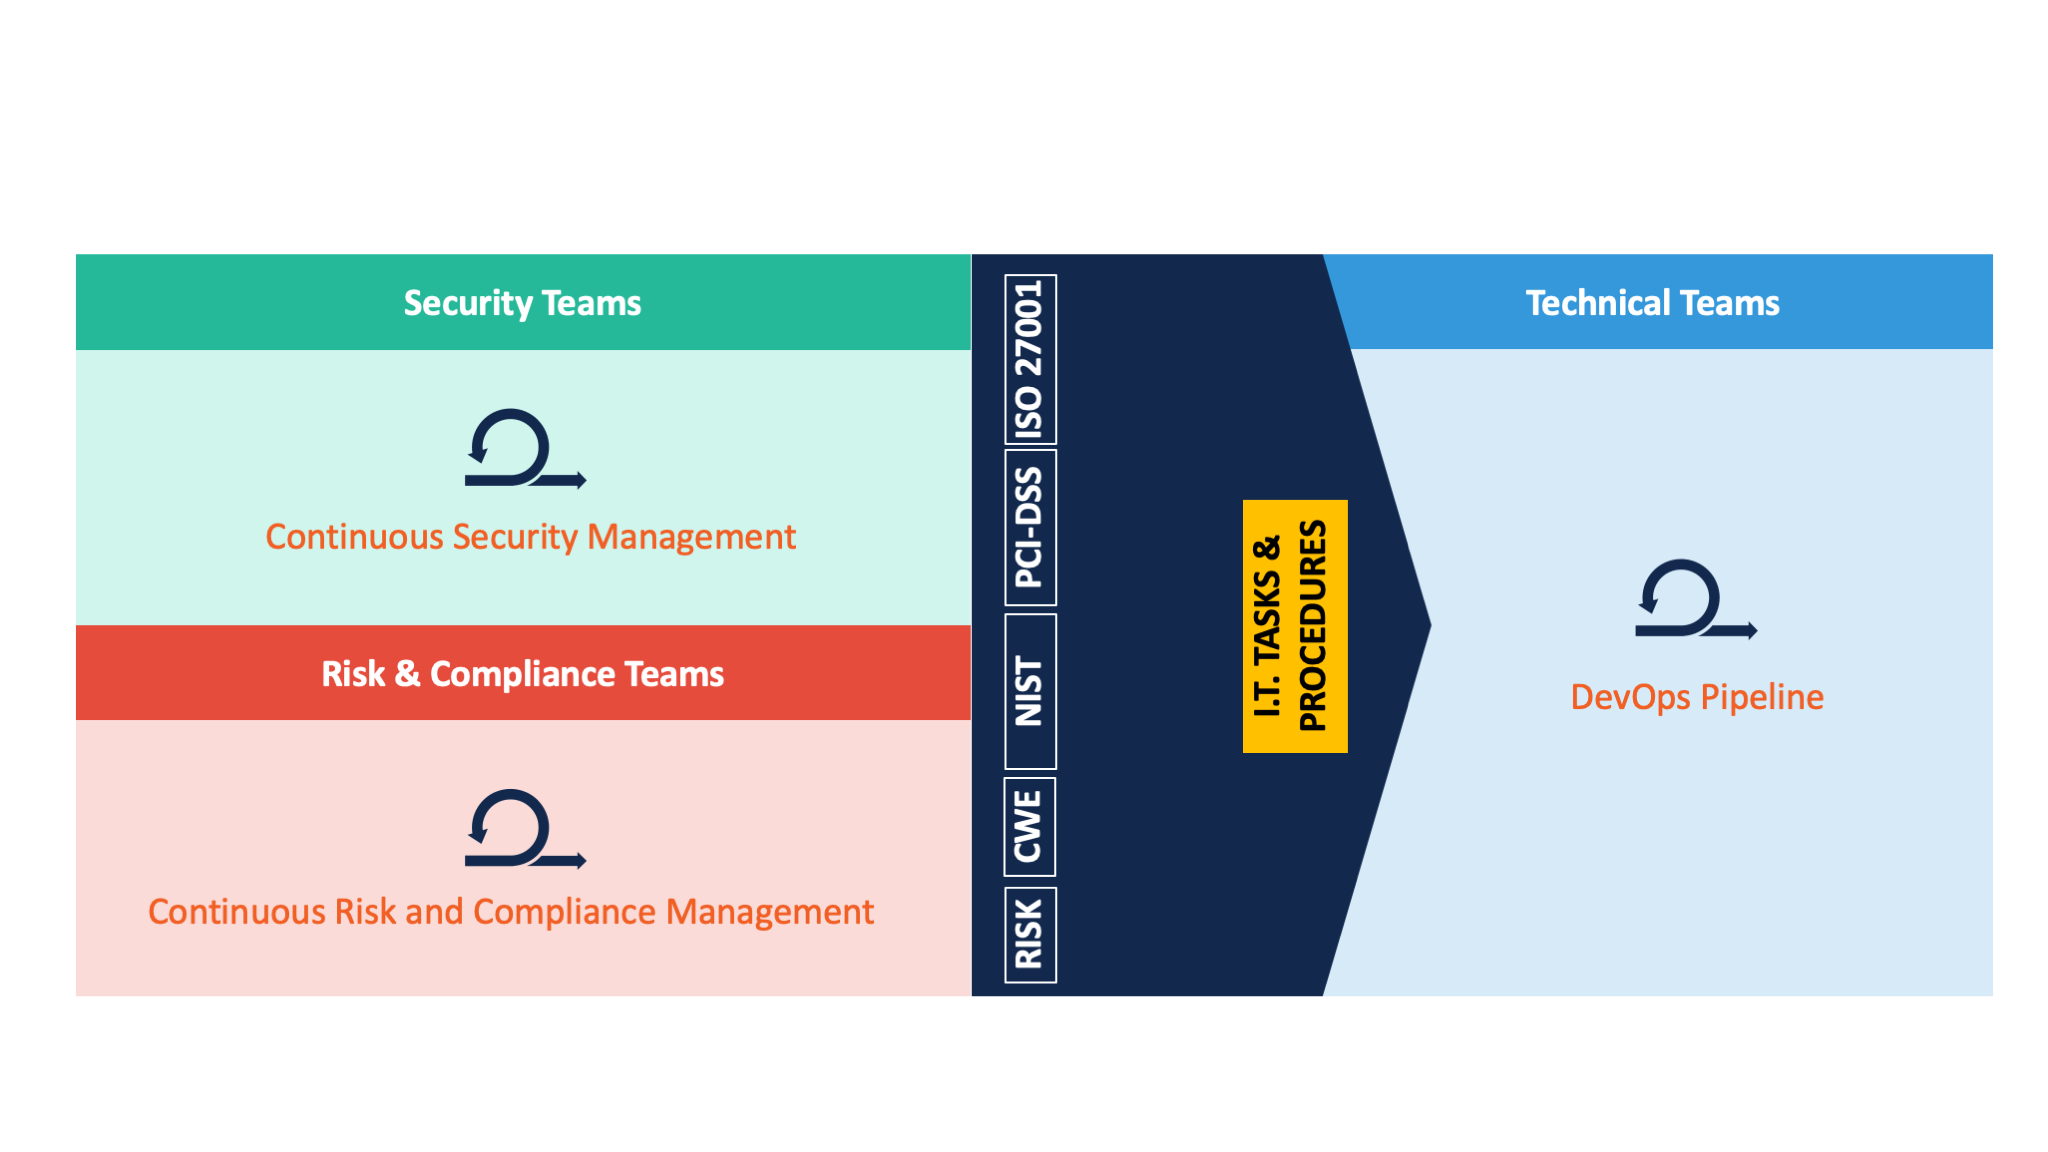 Process disconnect between security, risk and compliance and technical teams 